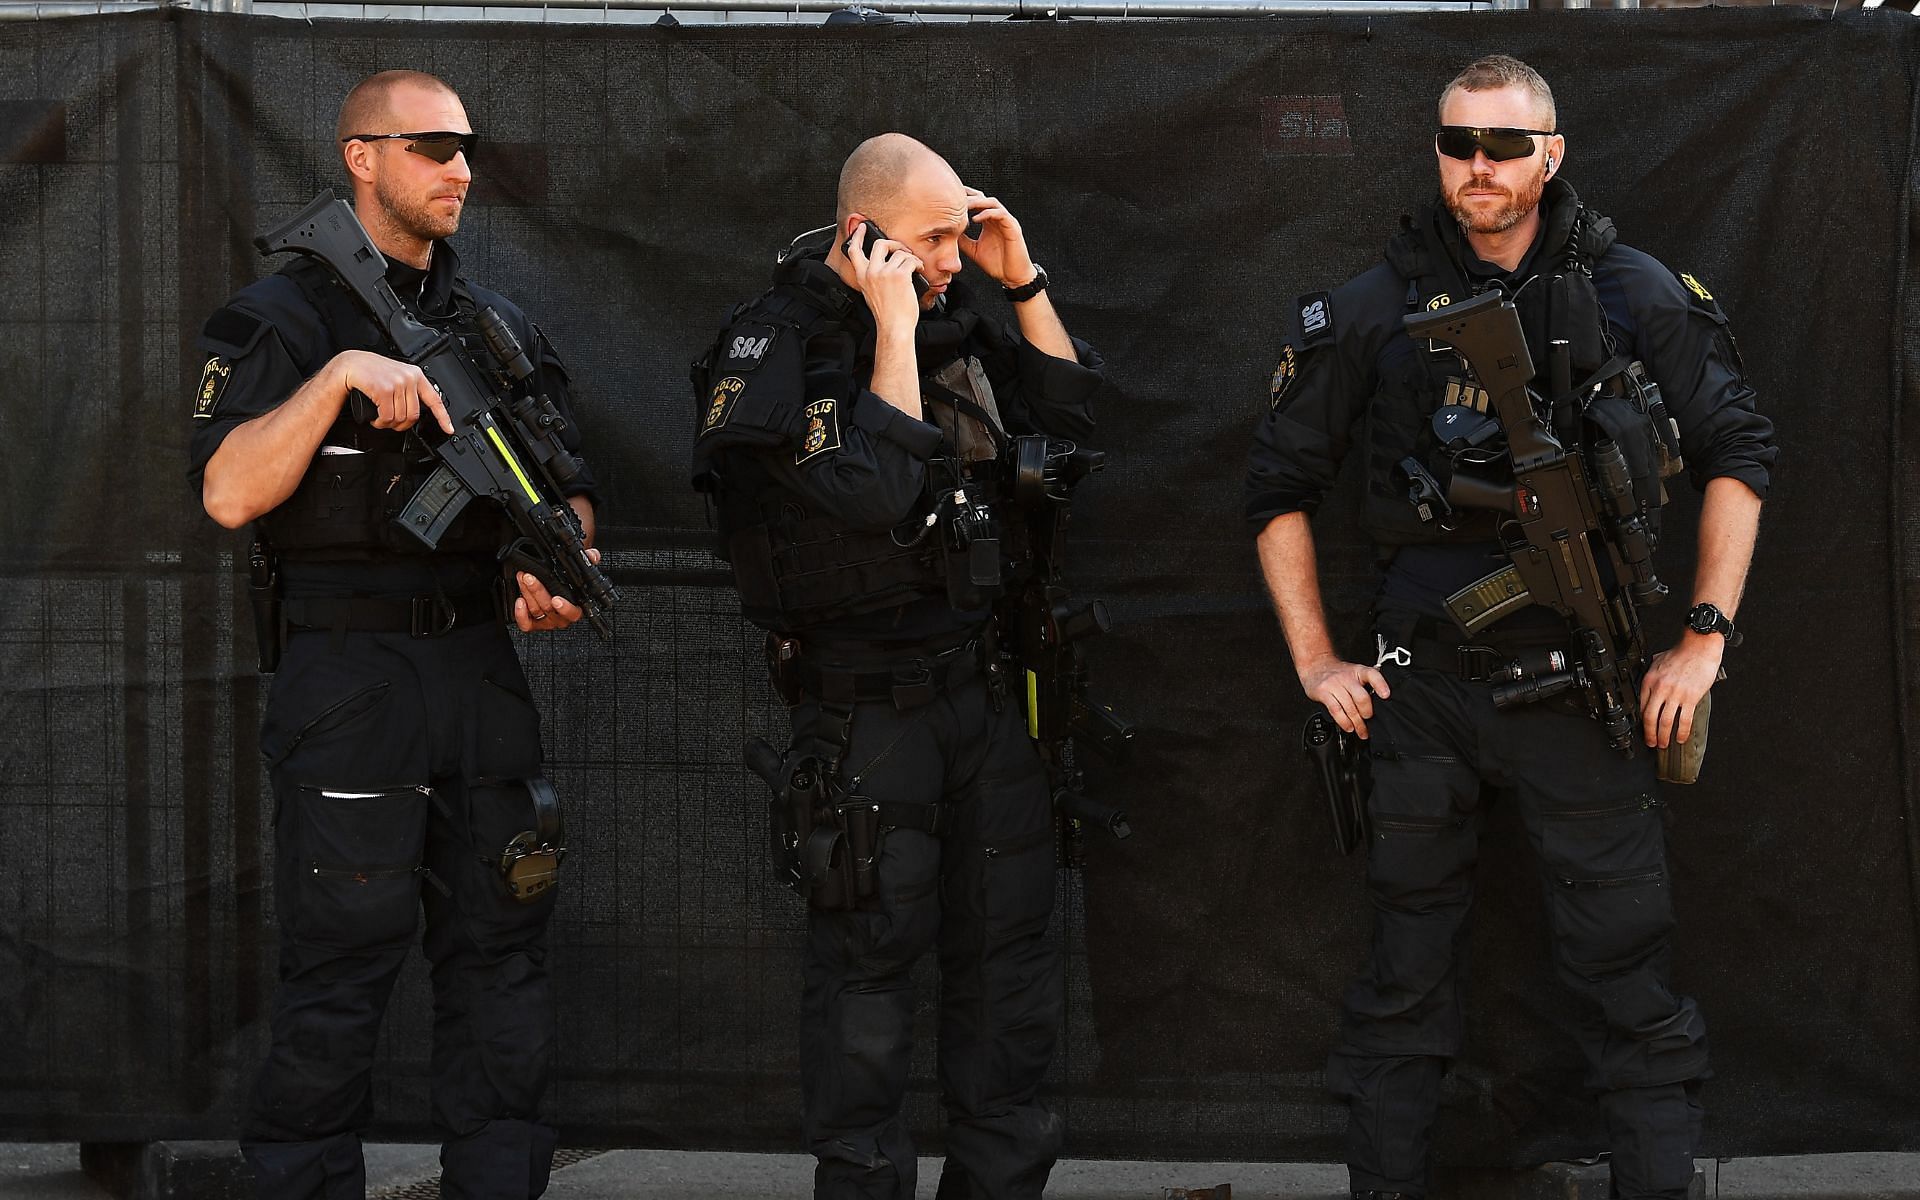 Armed Swedish police personnel